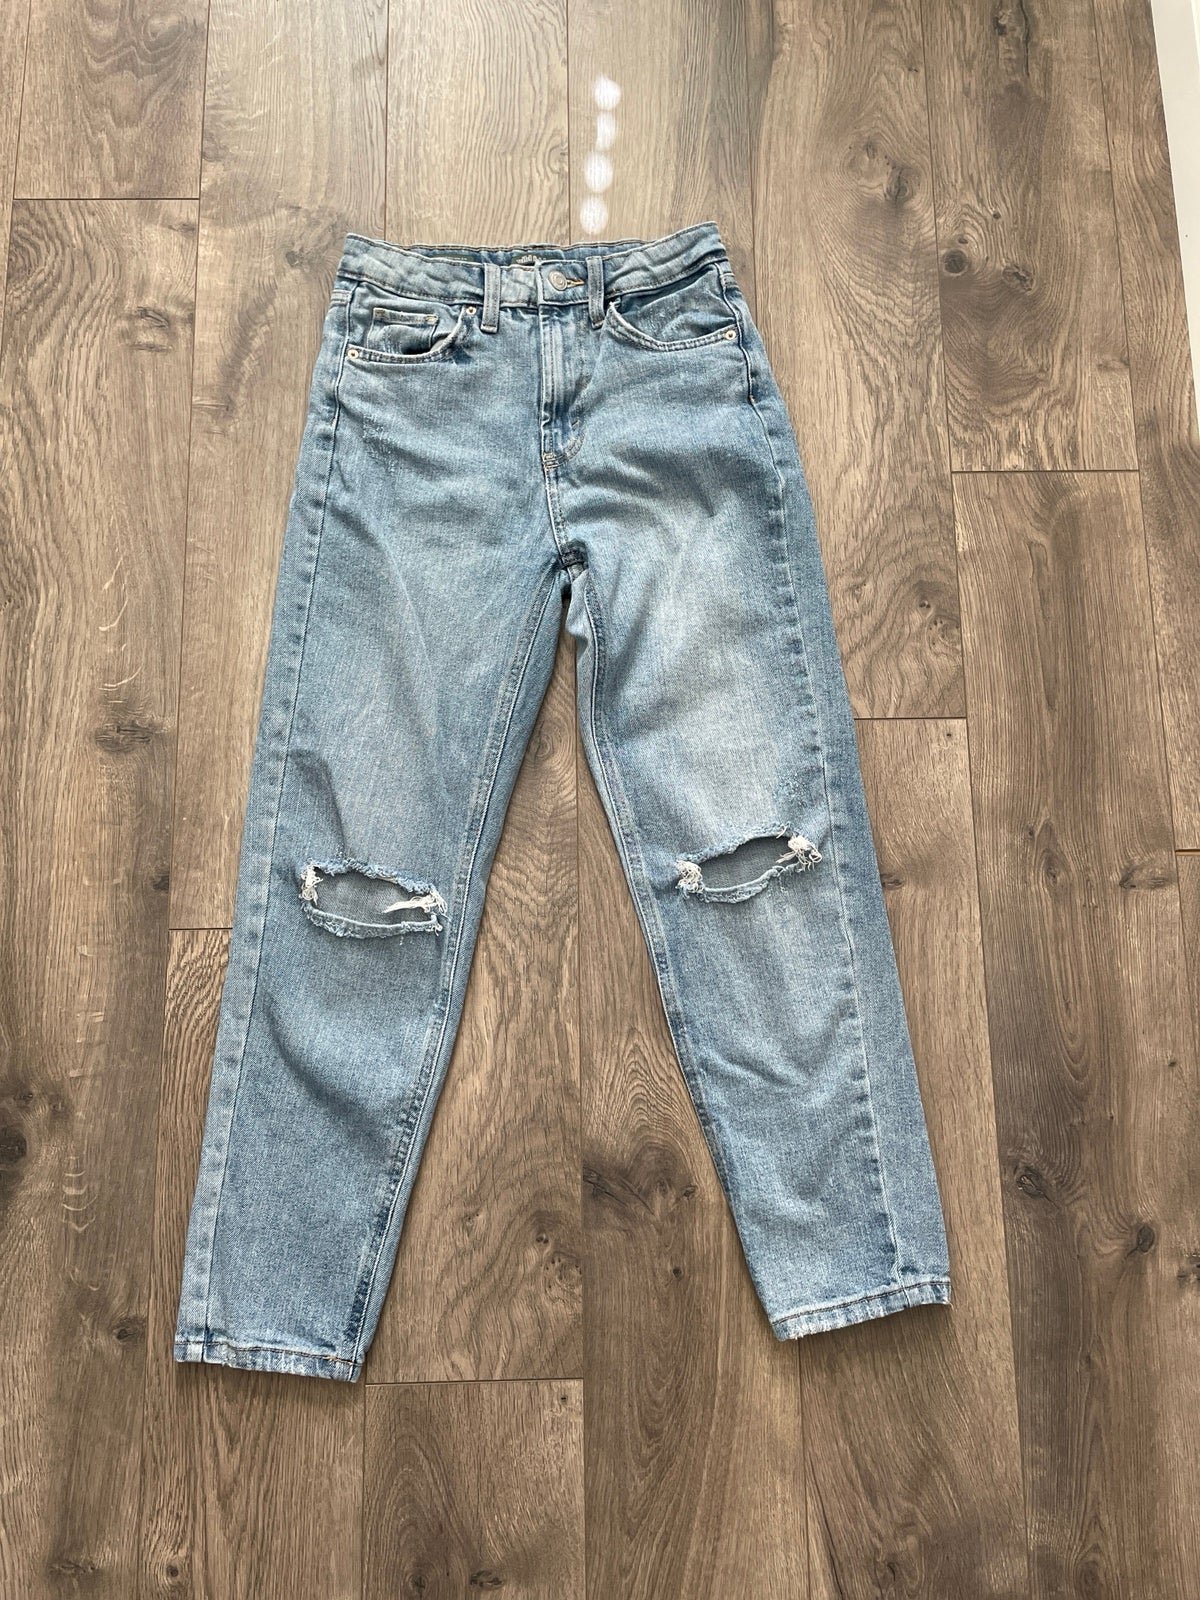 Nice Wild fable jeans iRrVAO7uH Store Online